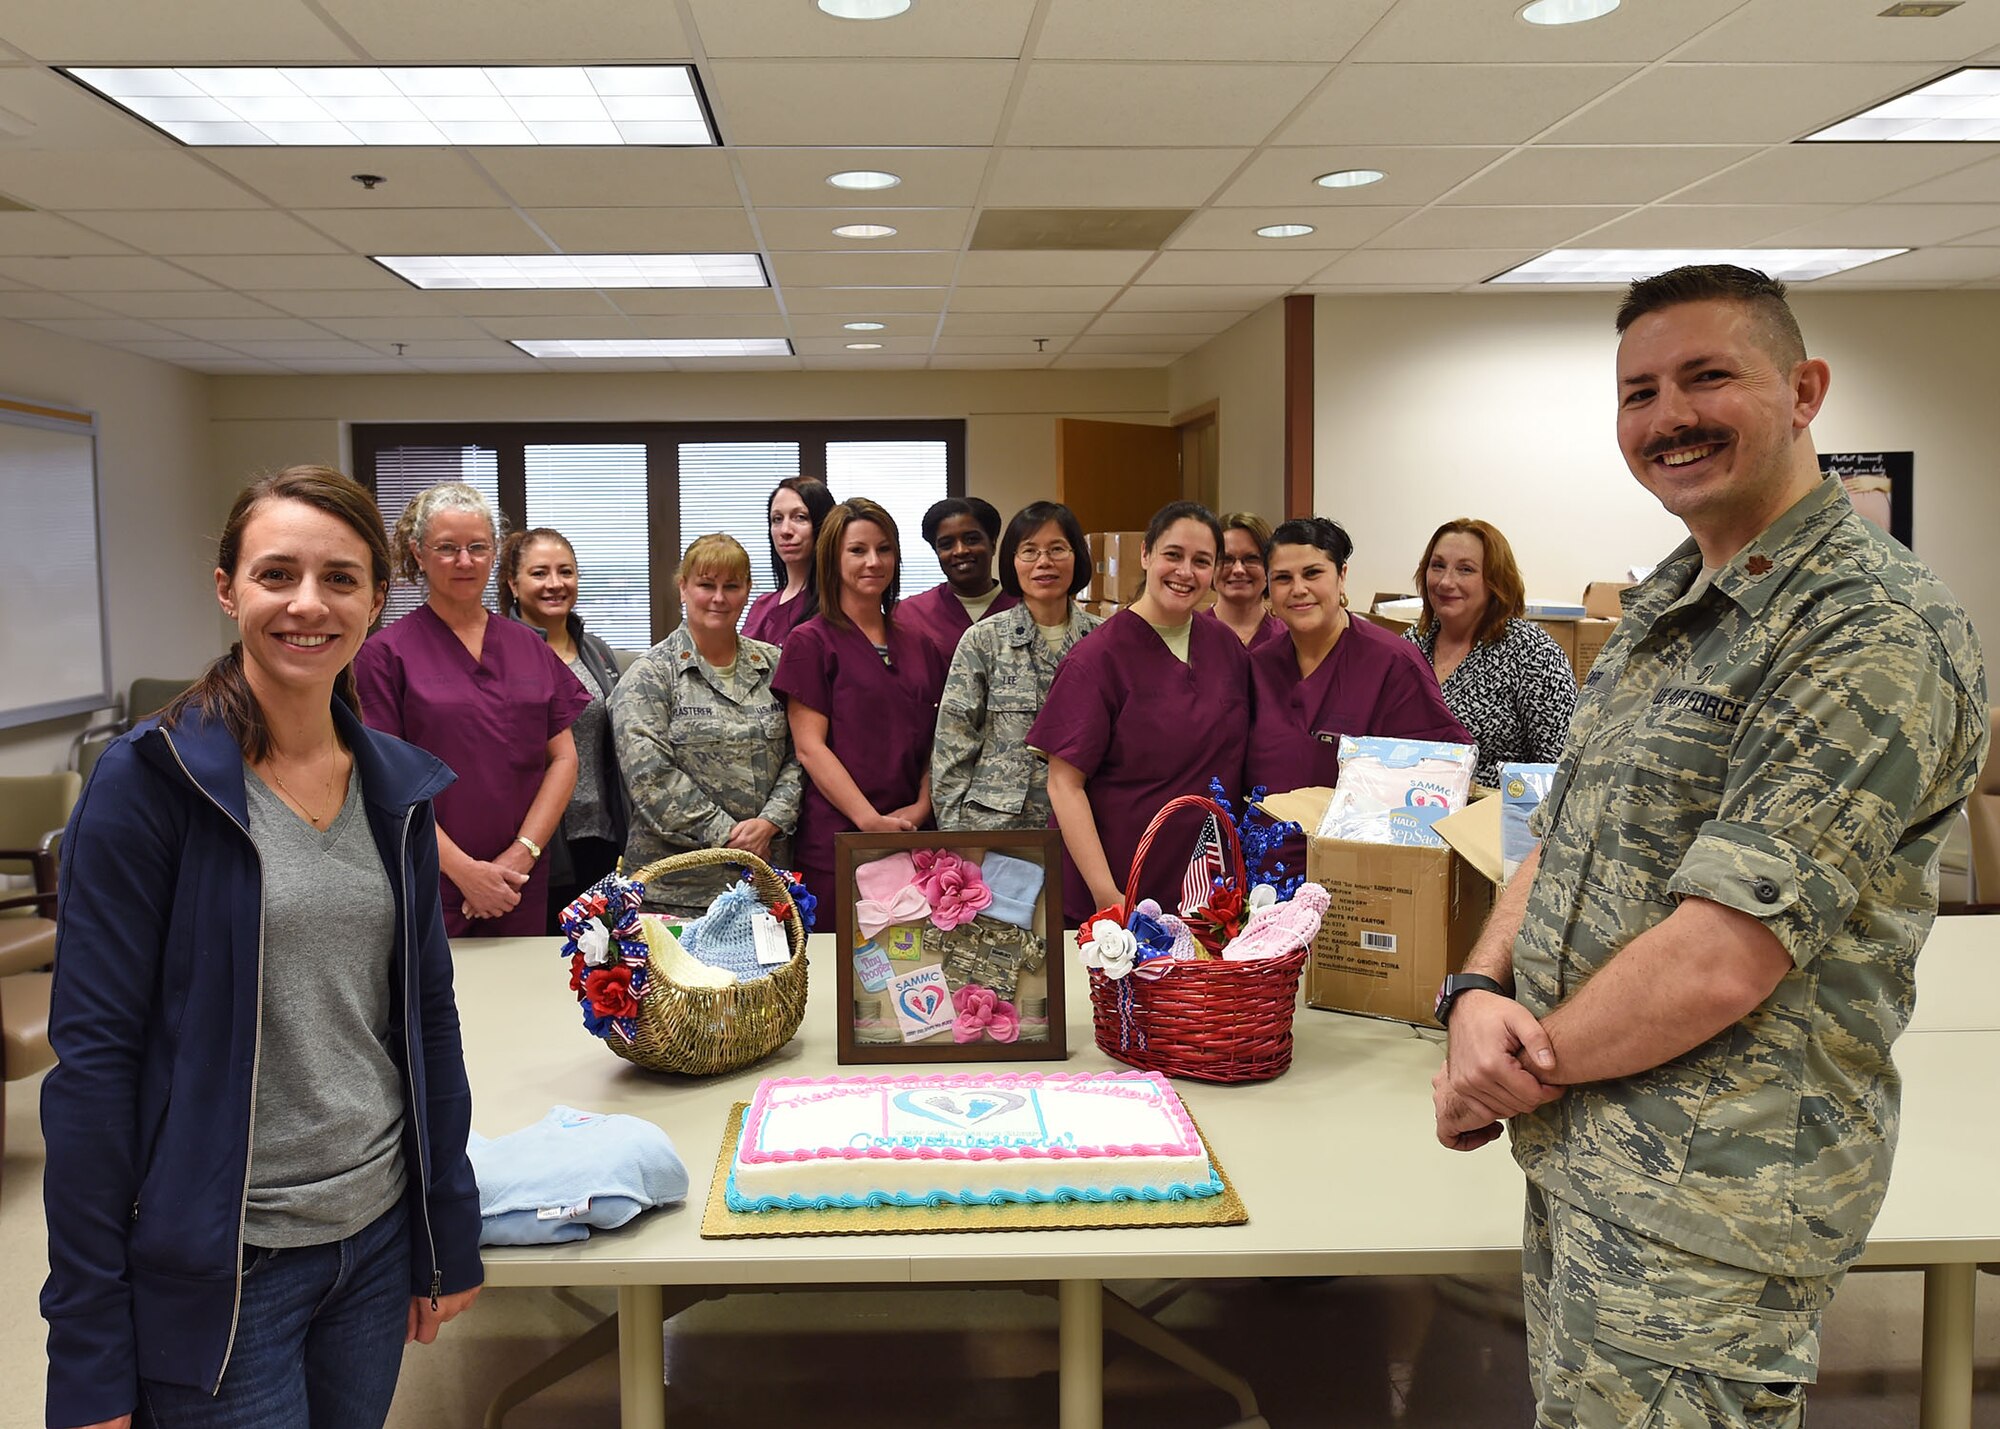 Maj. Nicholas Carr, 959th Medical Group staff neonatologist, and members of his team present a small shadow box to Kelly Banachowski, Wilford Hall Auxiliary service chair, in recognition of the WHA’s support to the Safe to Sleep campaign March 23 at the San Antonio Military Medical Center. The WHA donated Halo SleepSack blankets to the Maternal-Child unit at SAMMC to send home with newborns to help promote safe sleeping habits. (U.S. Air Force photo/Tech. Sgt. Christopher Carwile)